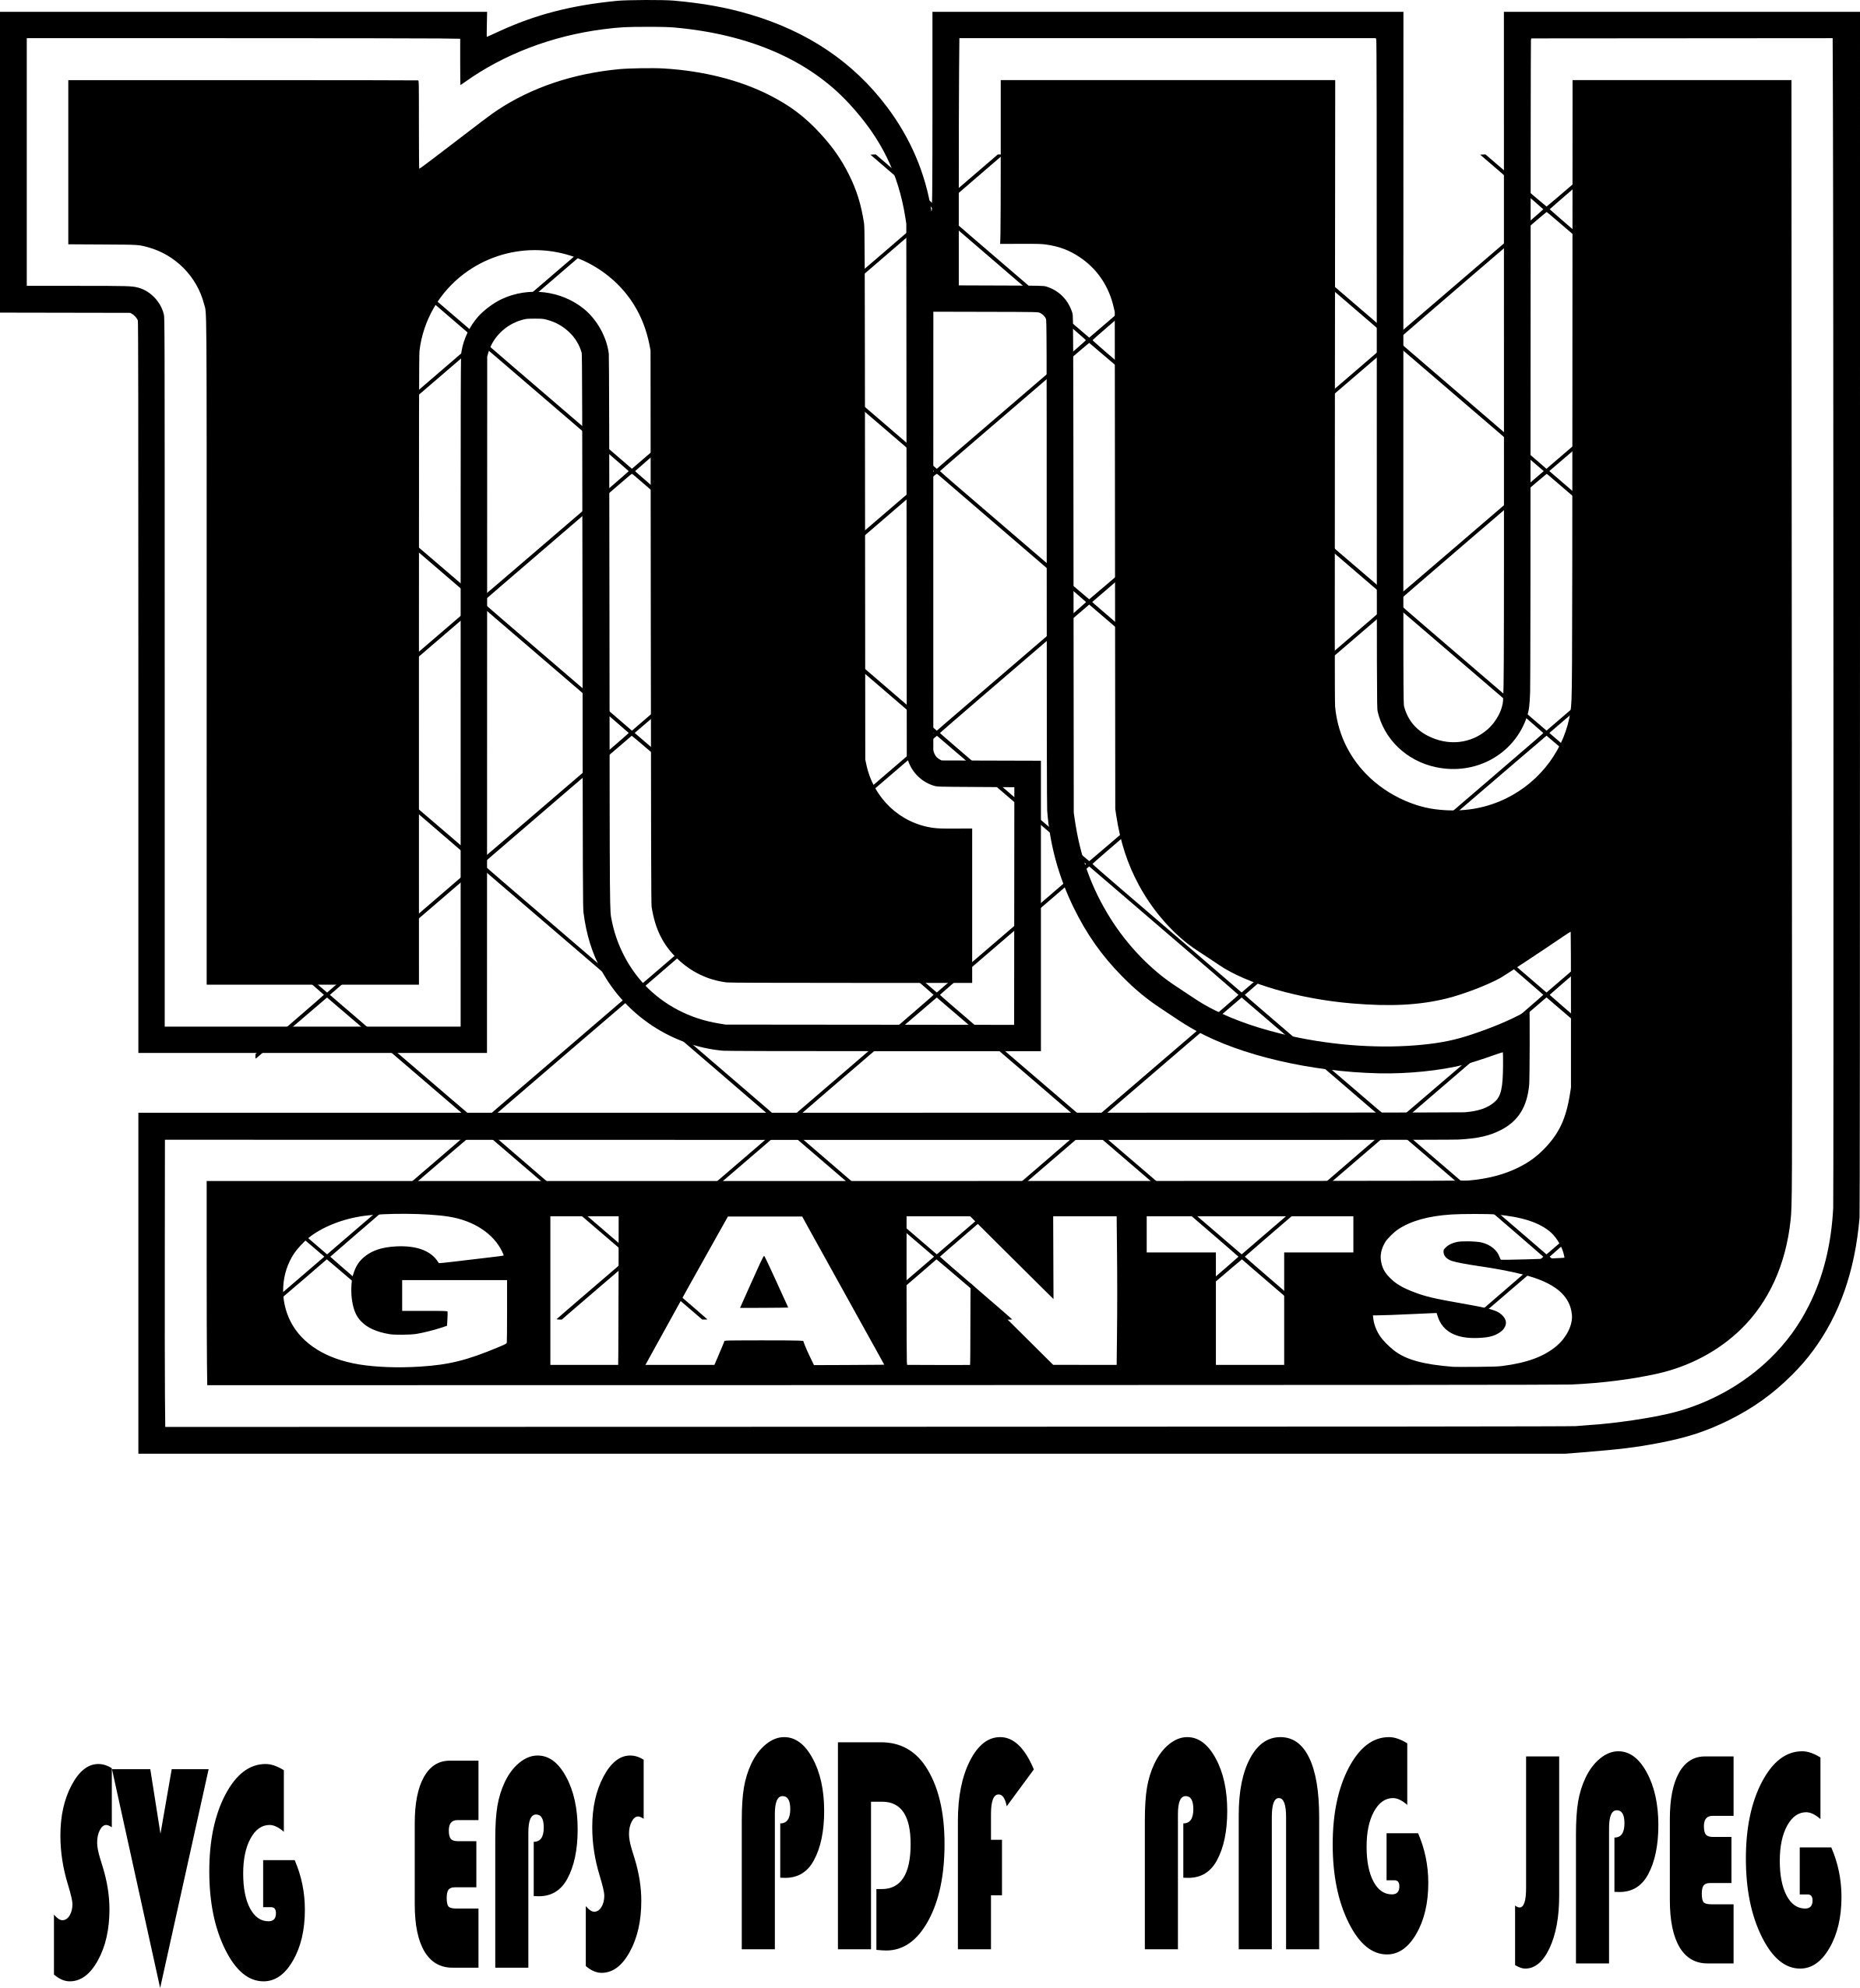 New York Giants Tumbler Unbelievable Baby Yoda NY Giants Gift Ideas -  Personalized Gifts: Family, Sports, Occasions, Trending